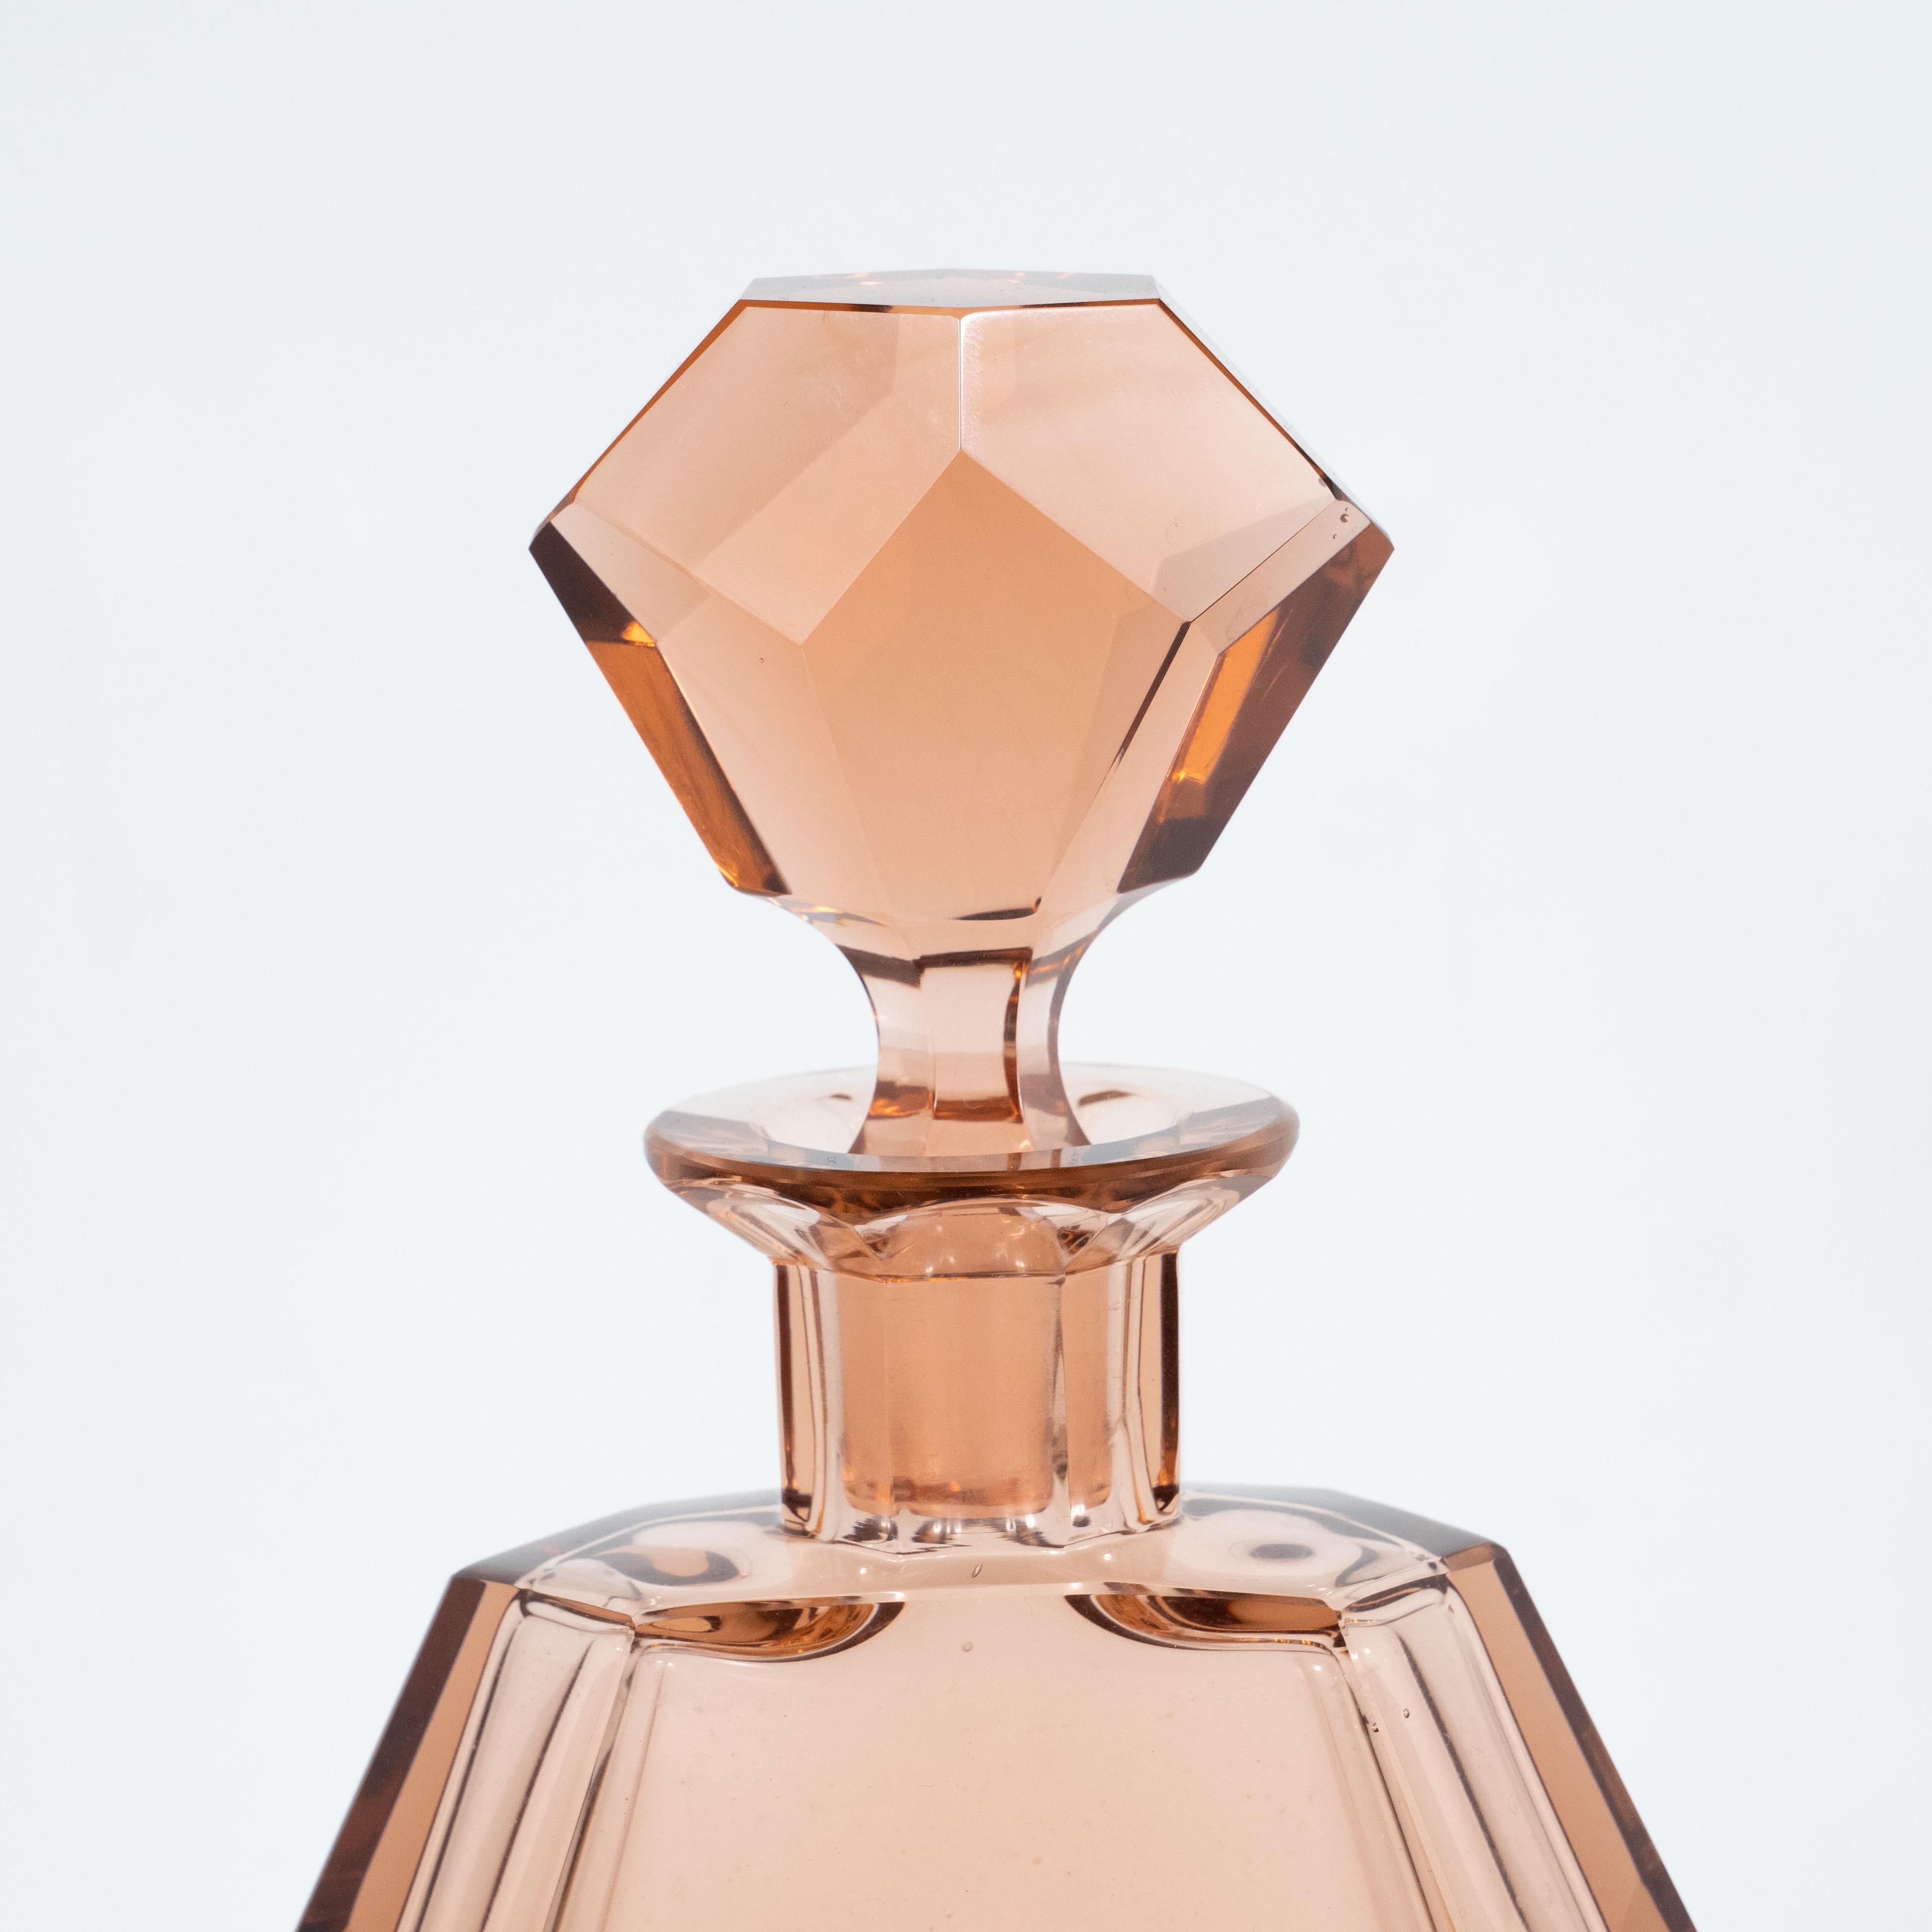 This gorgeous Art Deco Machine Age decanter was realized in the Czech Republic- a country renowned for the period for its superlative glass products, circa 1930. It features a faceted body replete with dynamic angles and geometric forms realized in